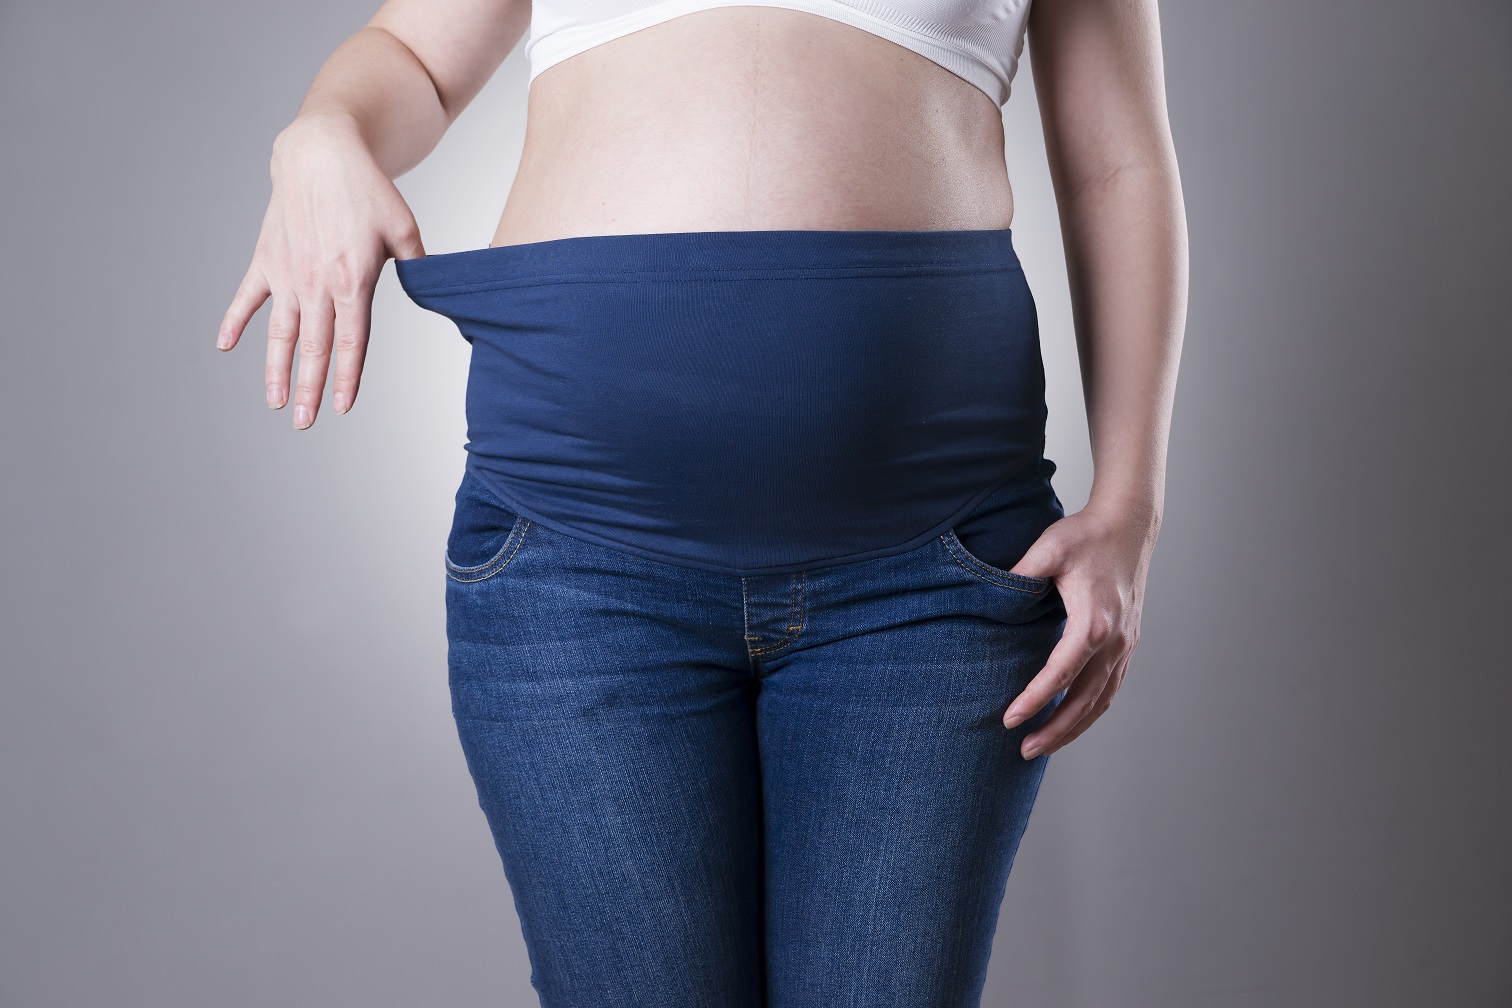 The Risks of Donning Tight Pants During Pregnancy